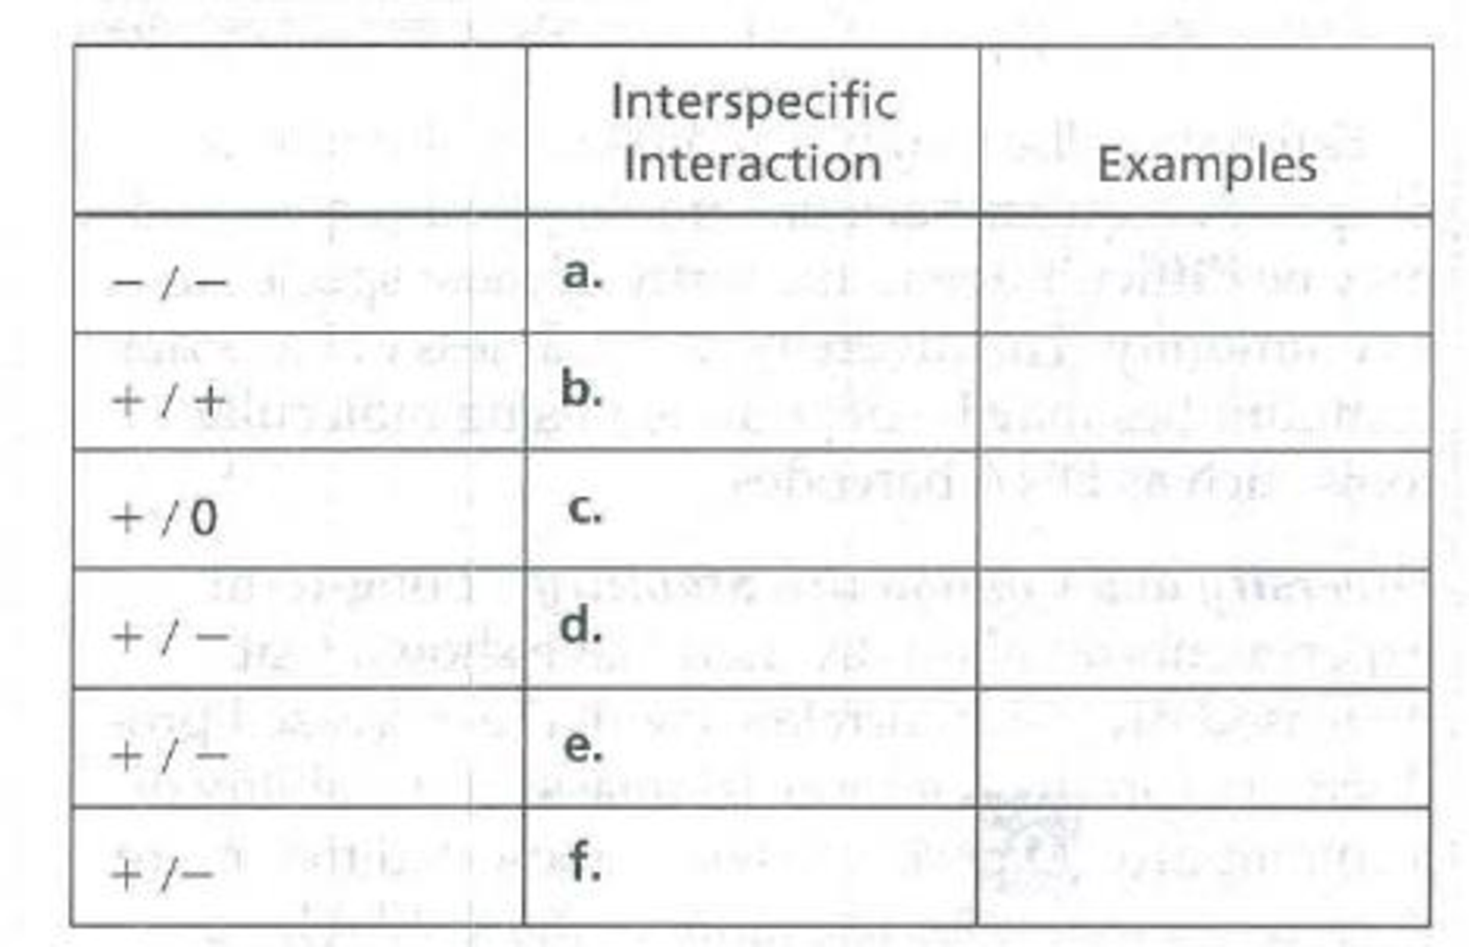 Chapter 54, Problem 3IQ, Name and give examples of the interspecific interactions symbolized in the table. 